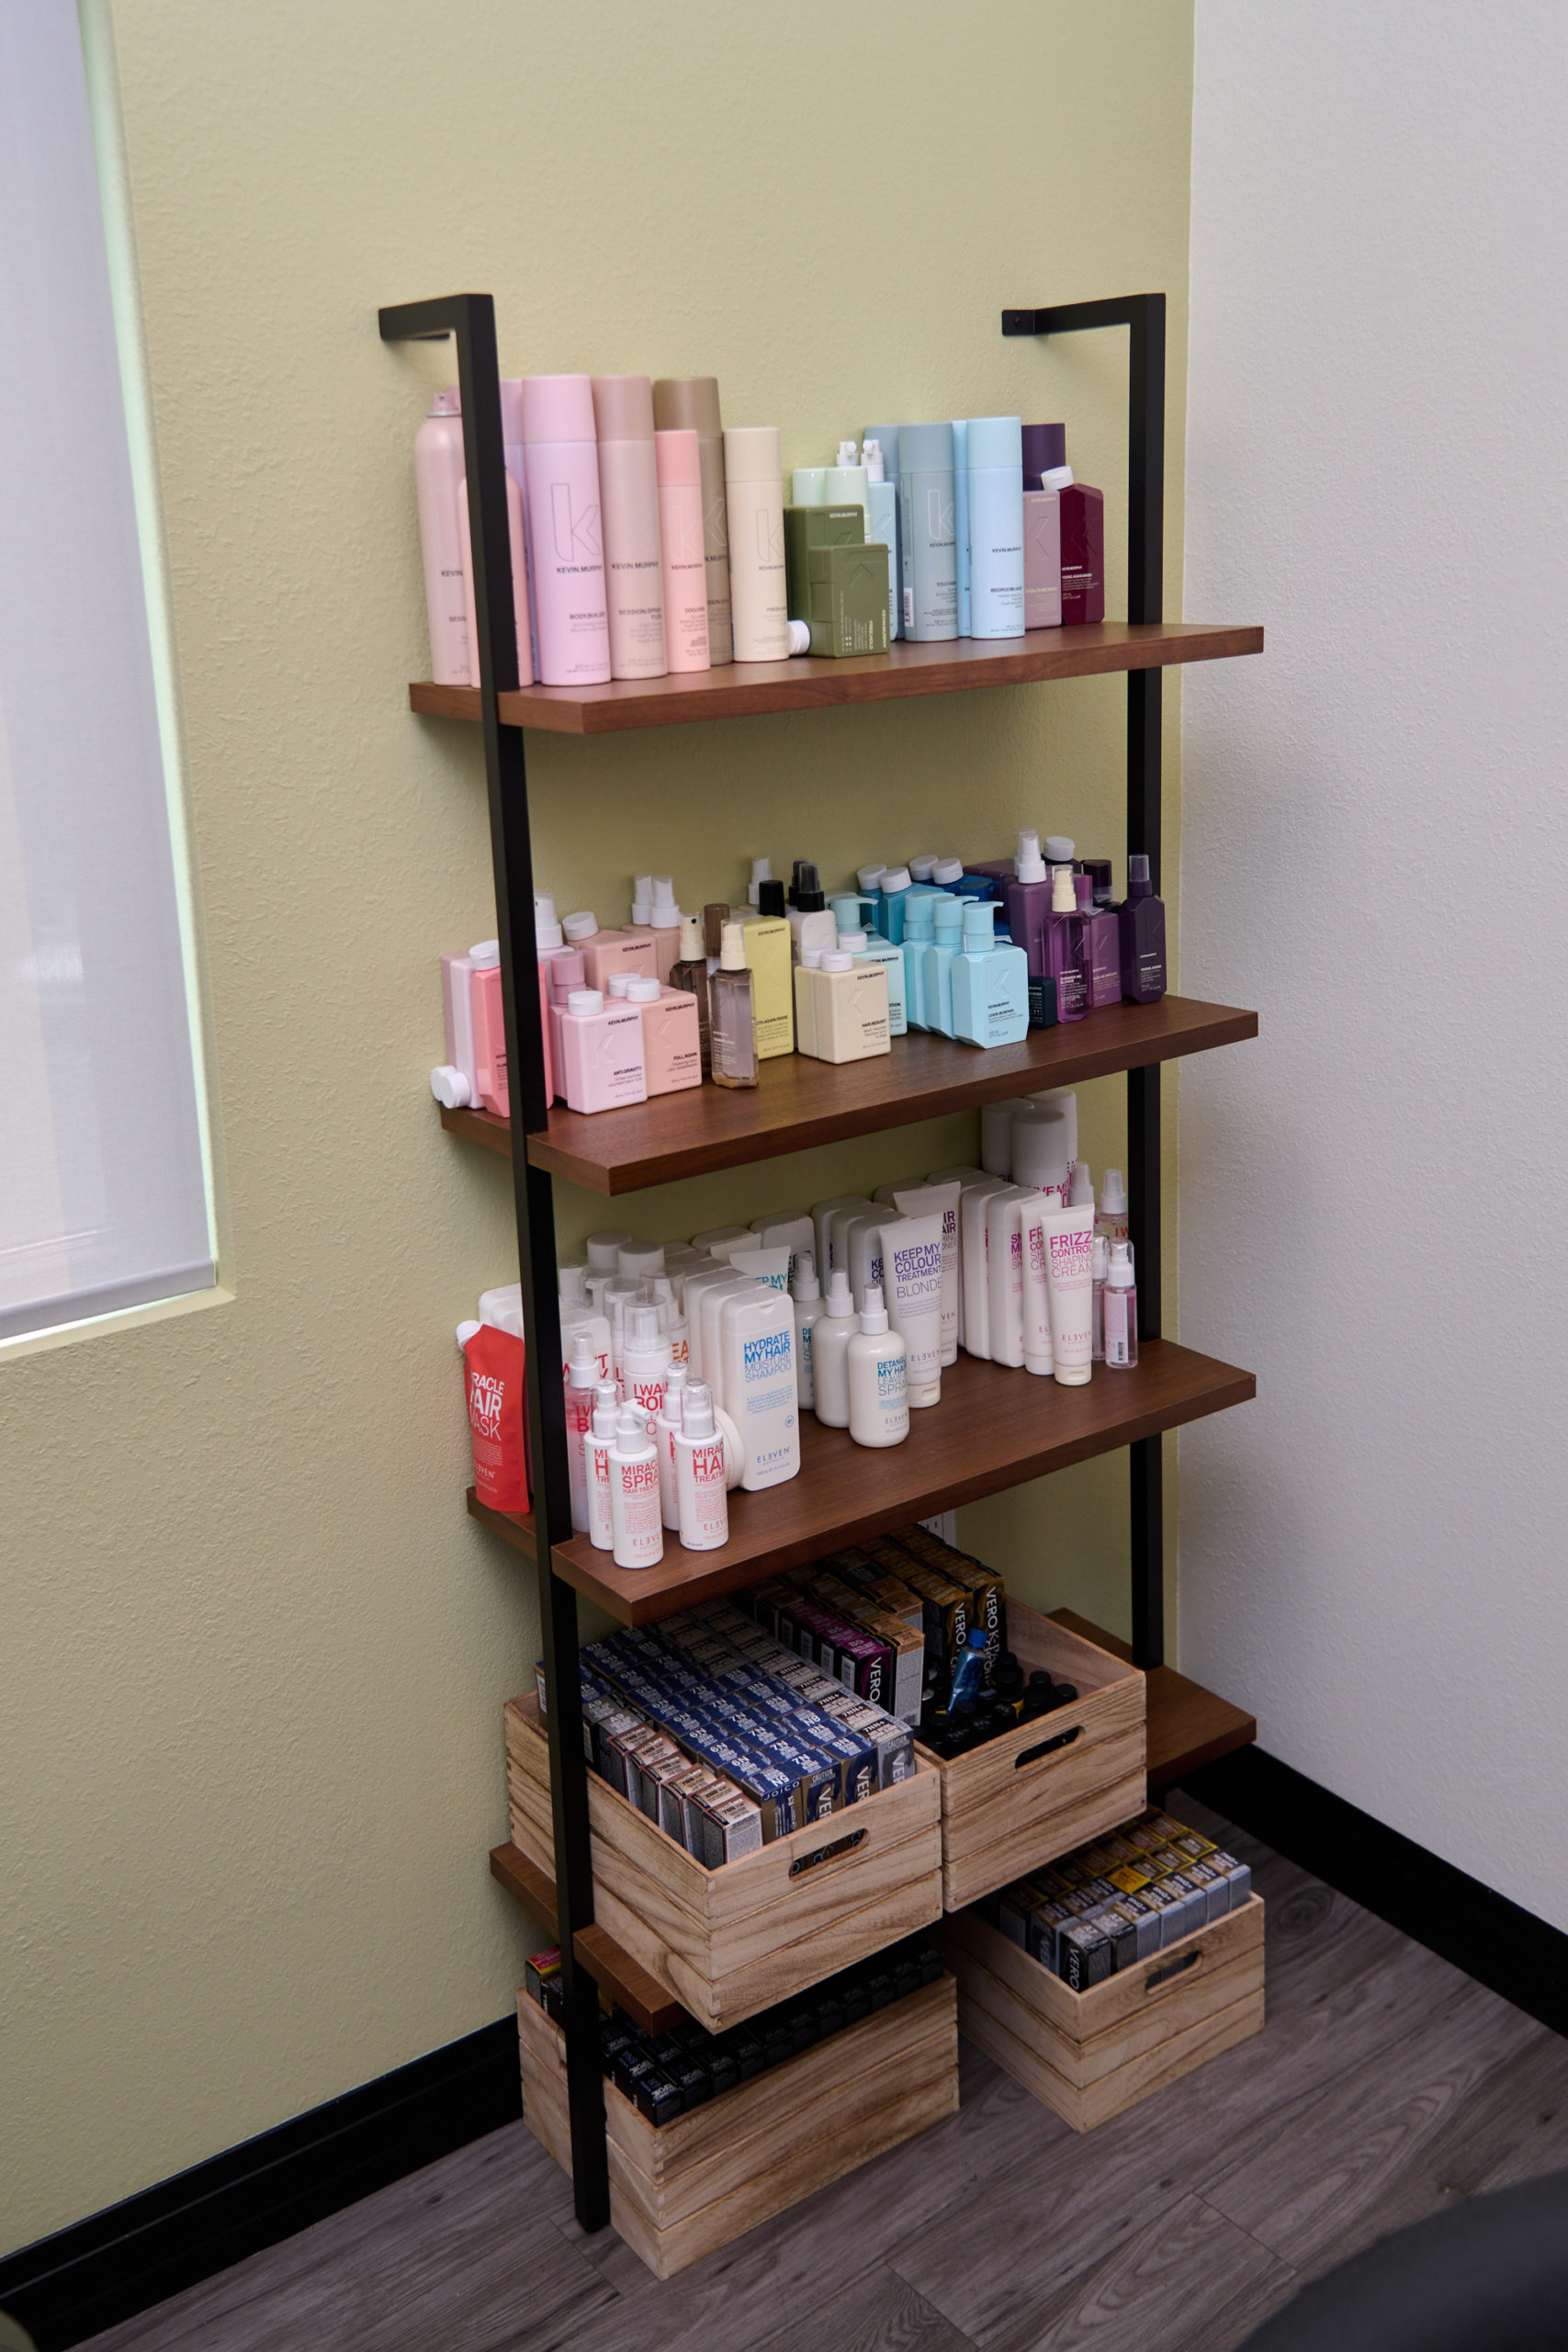 More shelving displaying hair products.